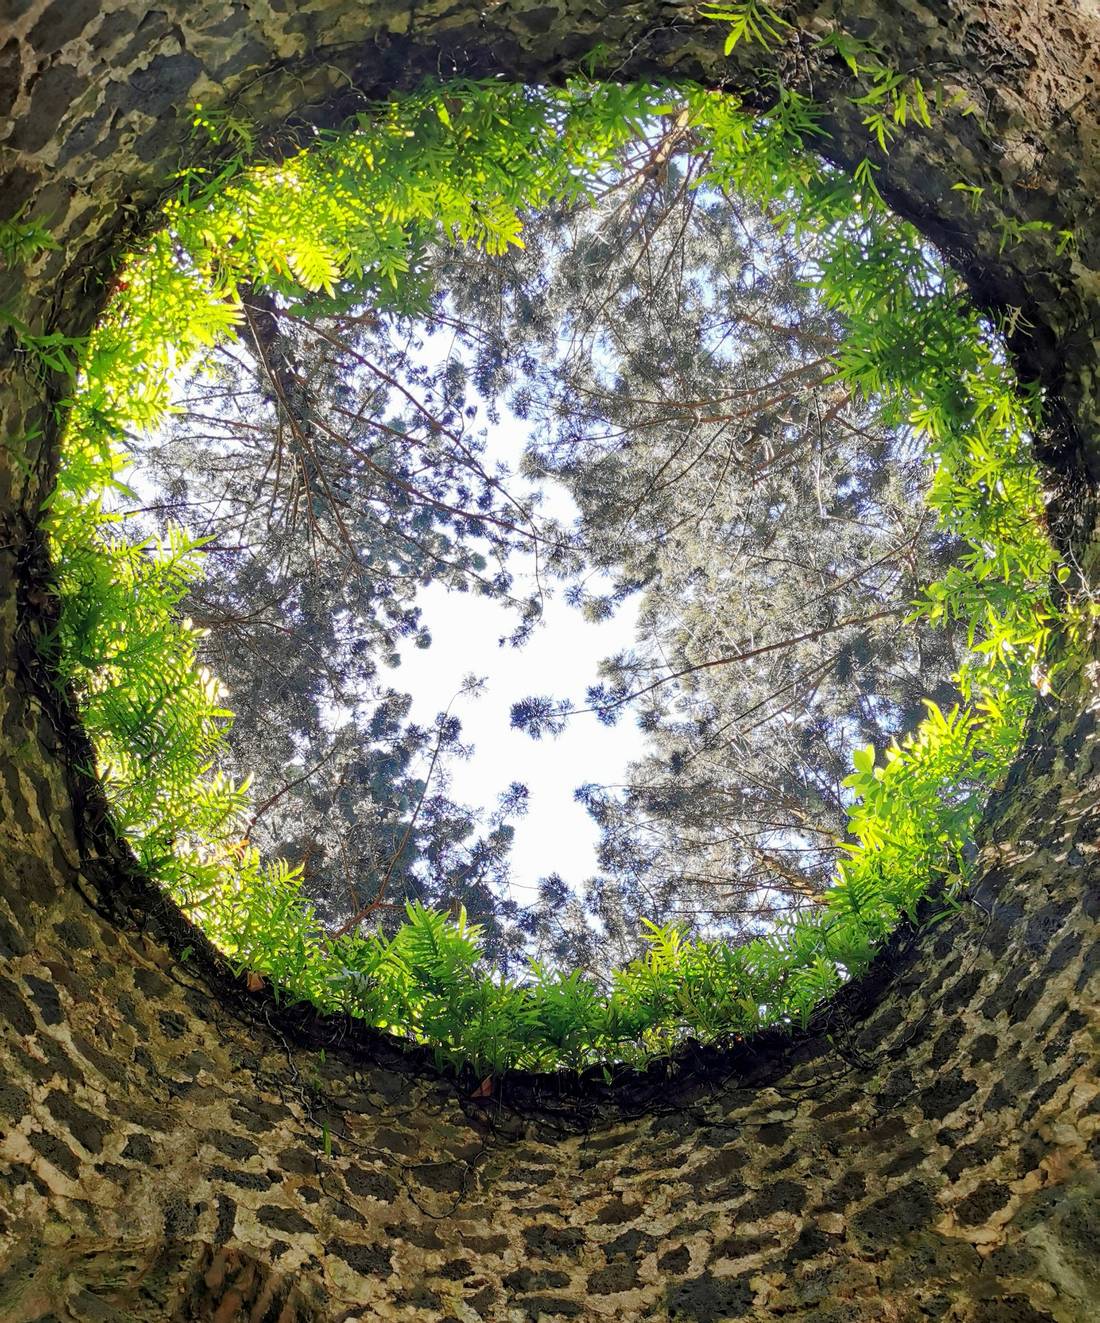 From the inside of the well...